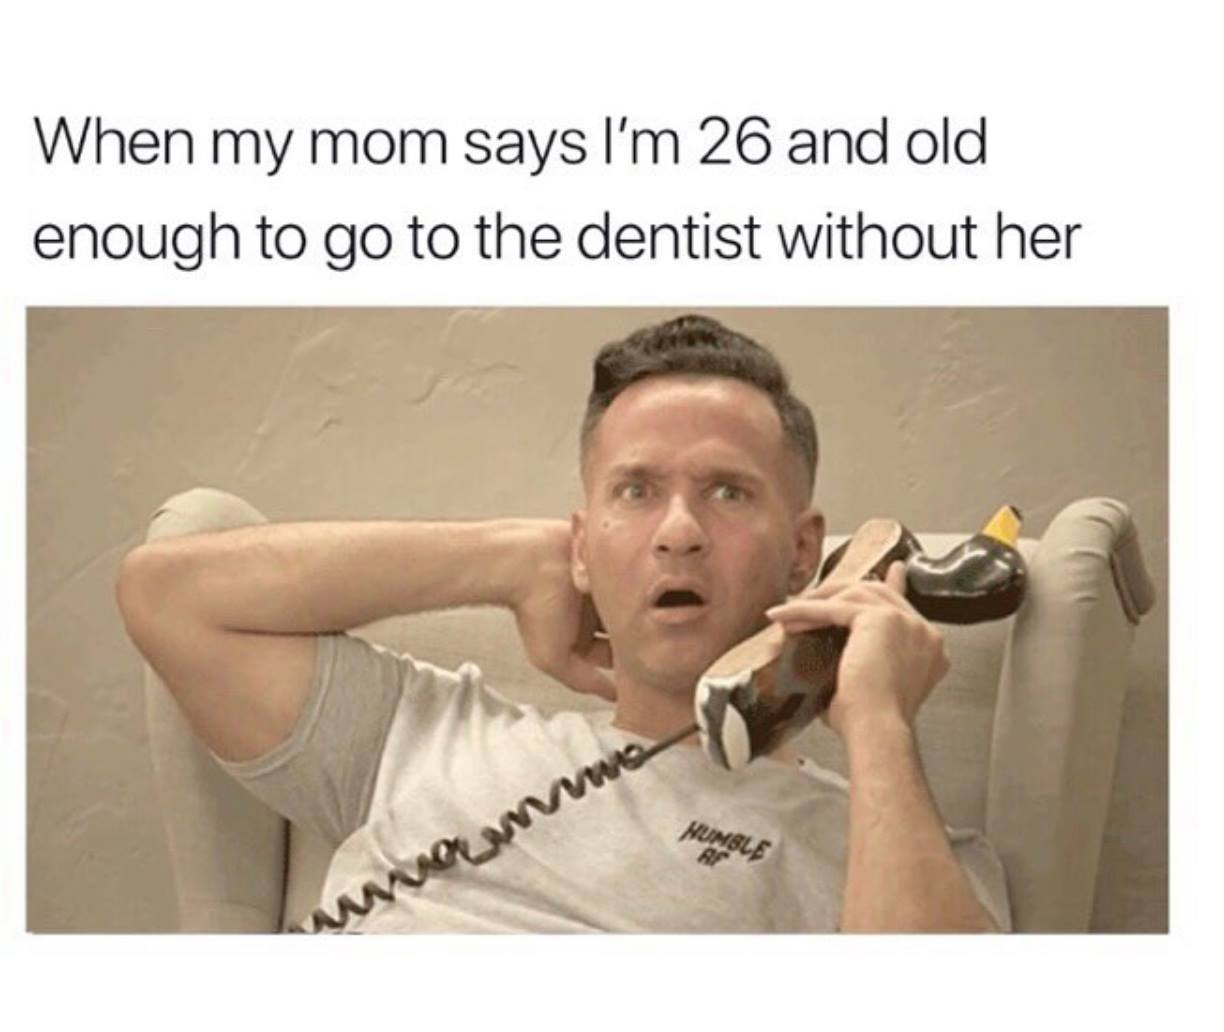 mom if you don t go - When my mom says I'm 26 and old enough to go to the dentist without her wo